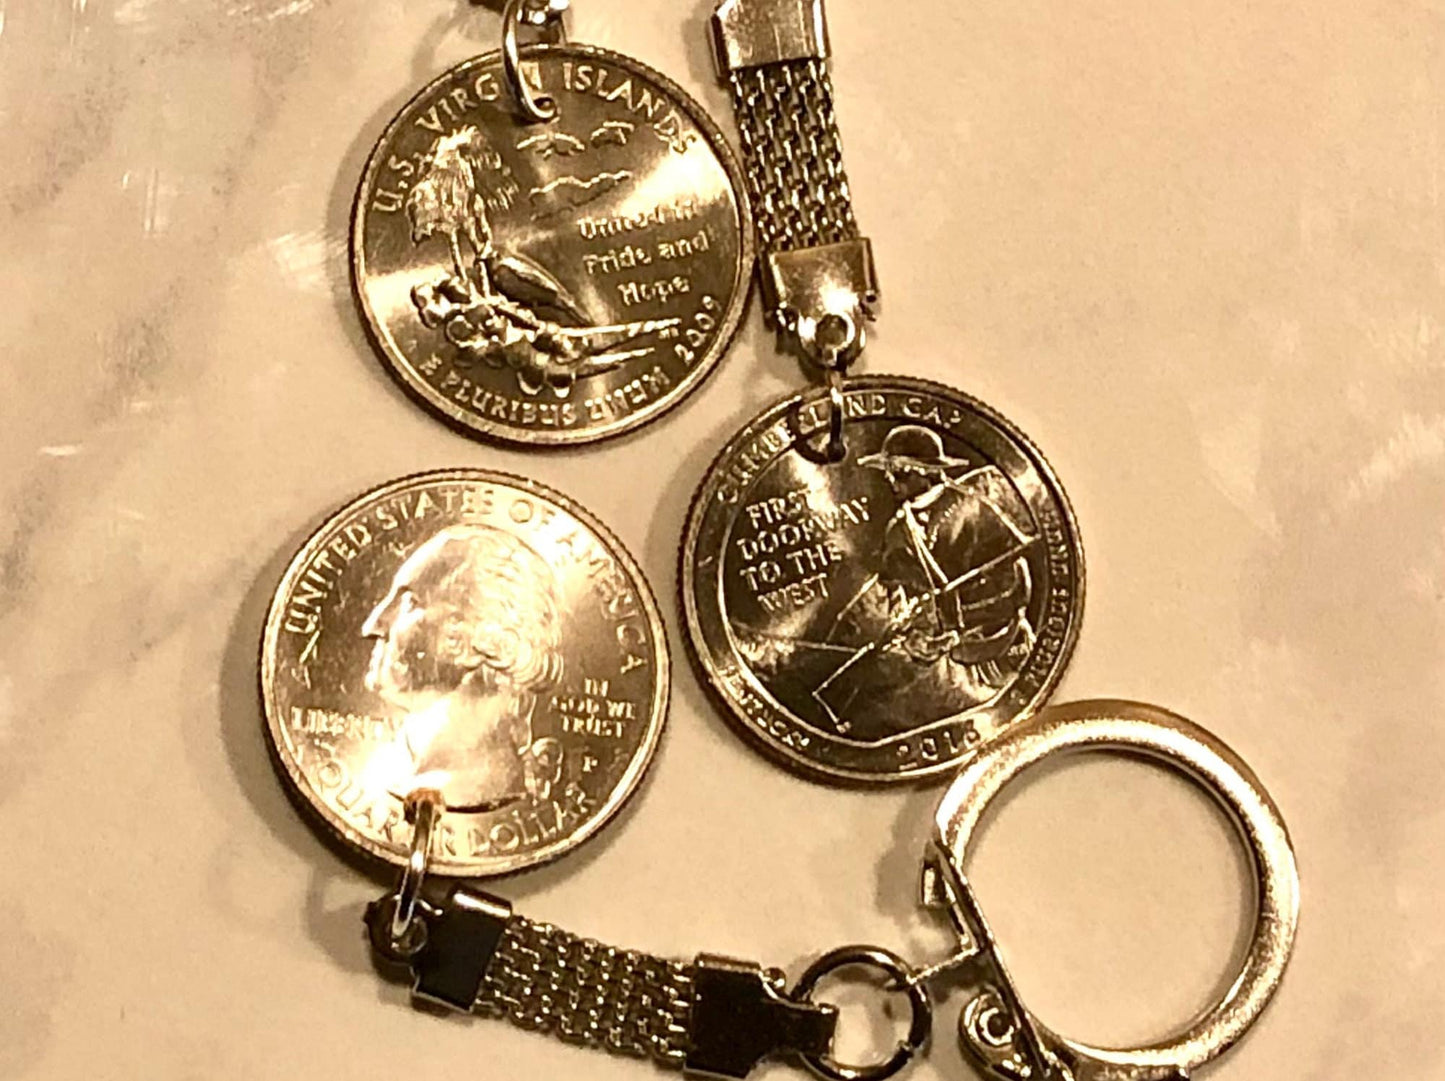 Parks Quarter Keychain United States America USA Coin Custom Made Charm Gift For Friend Coin Charm Gift For Him, Coin Collector, World Coins